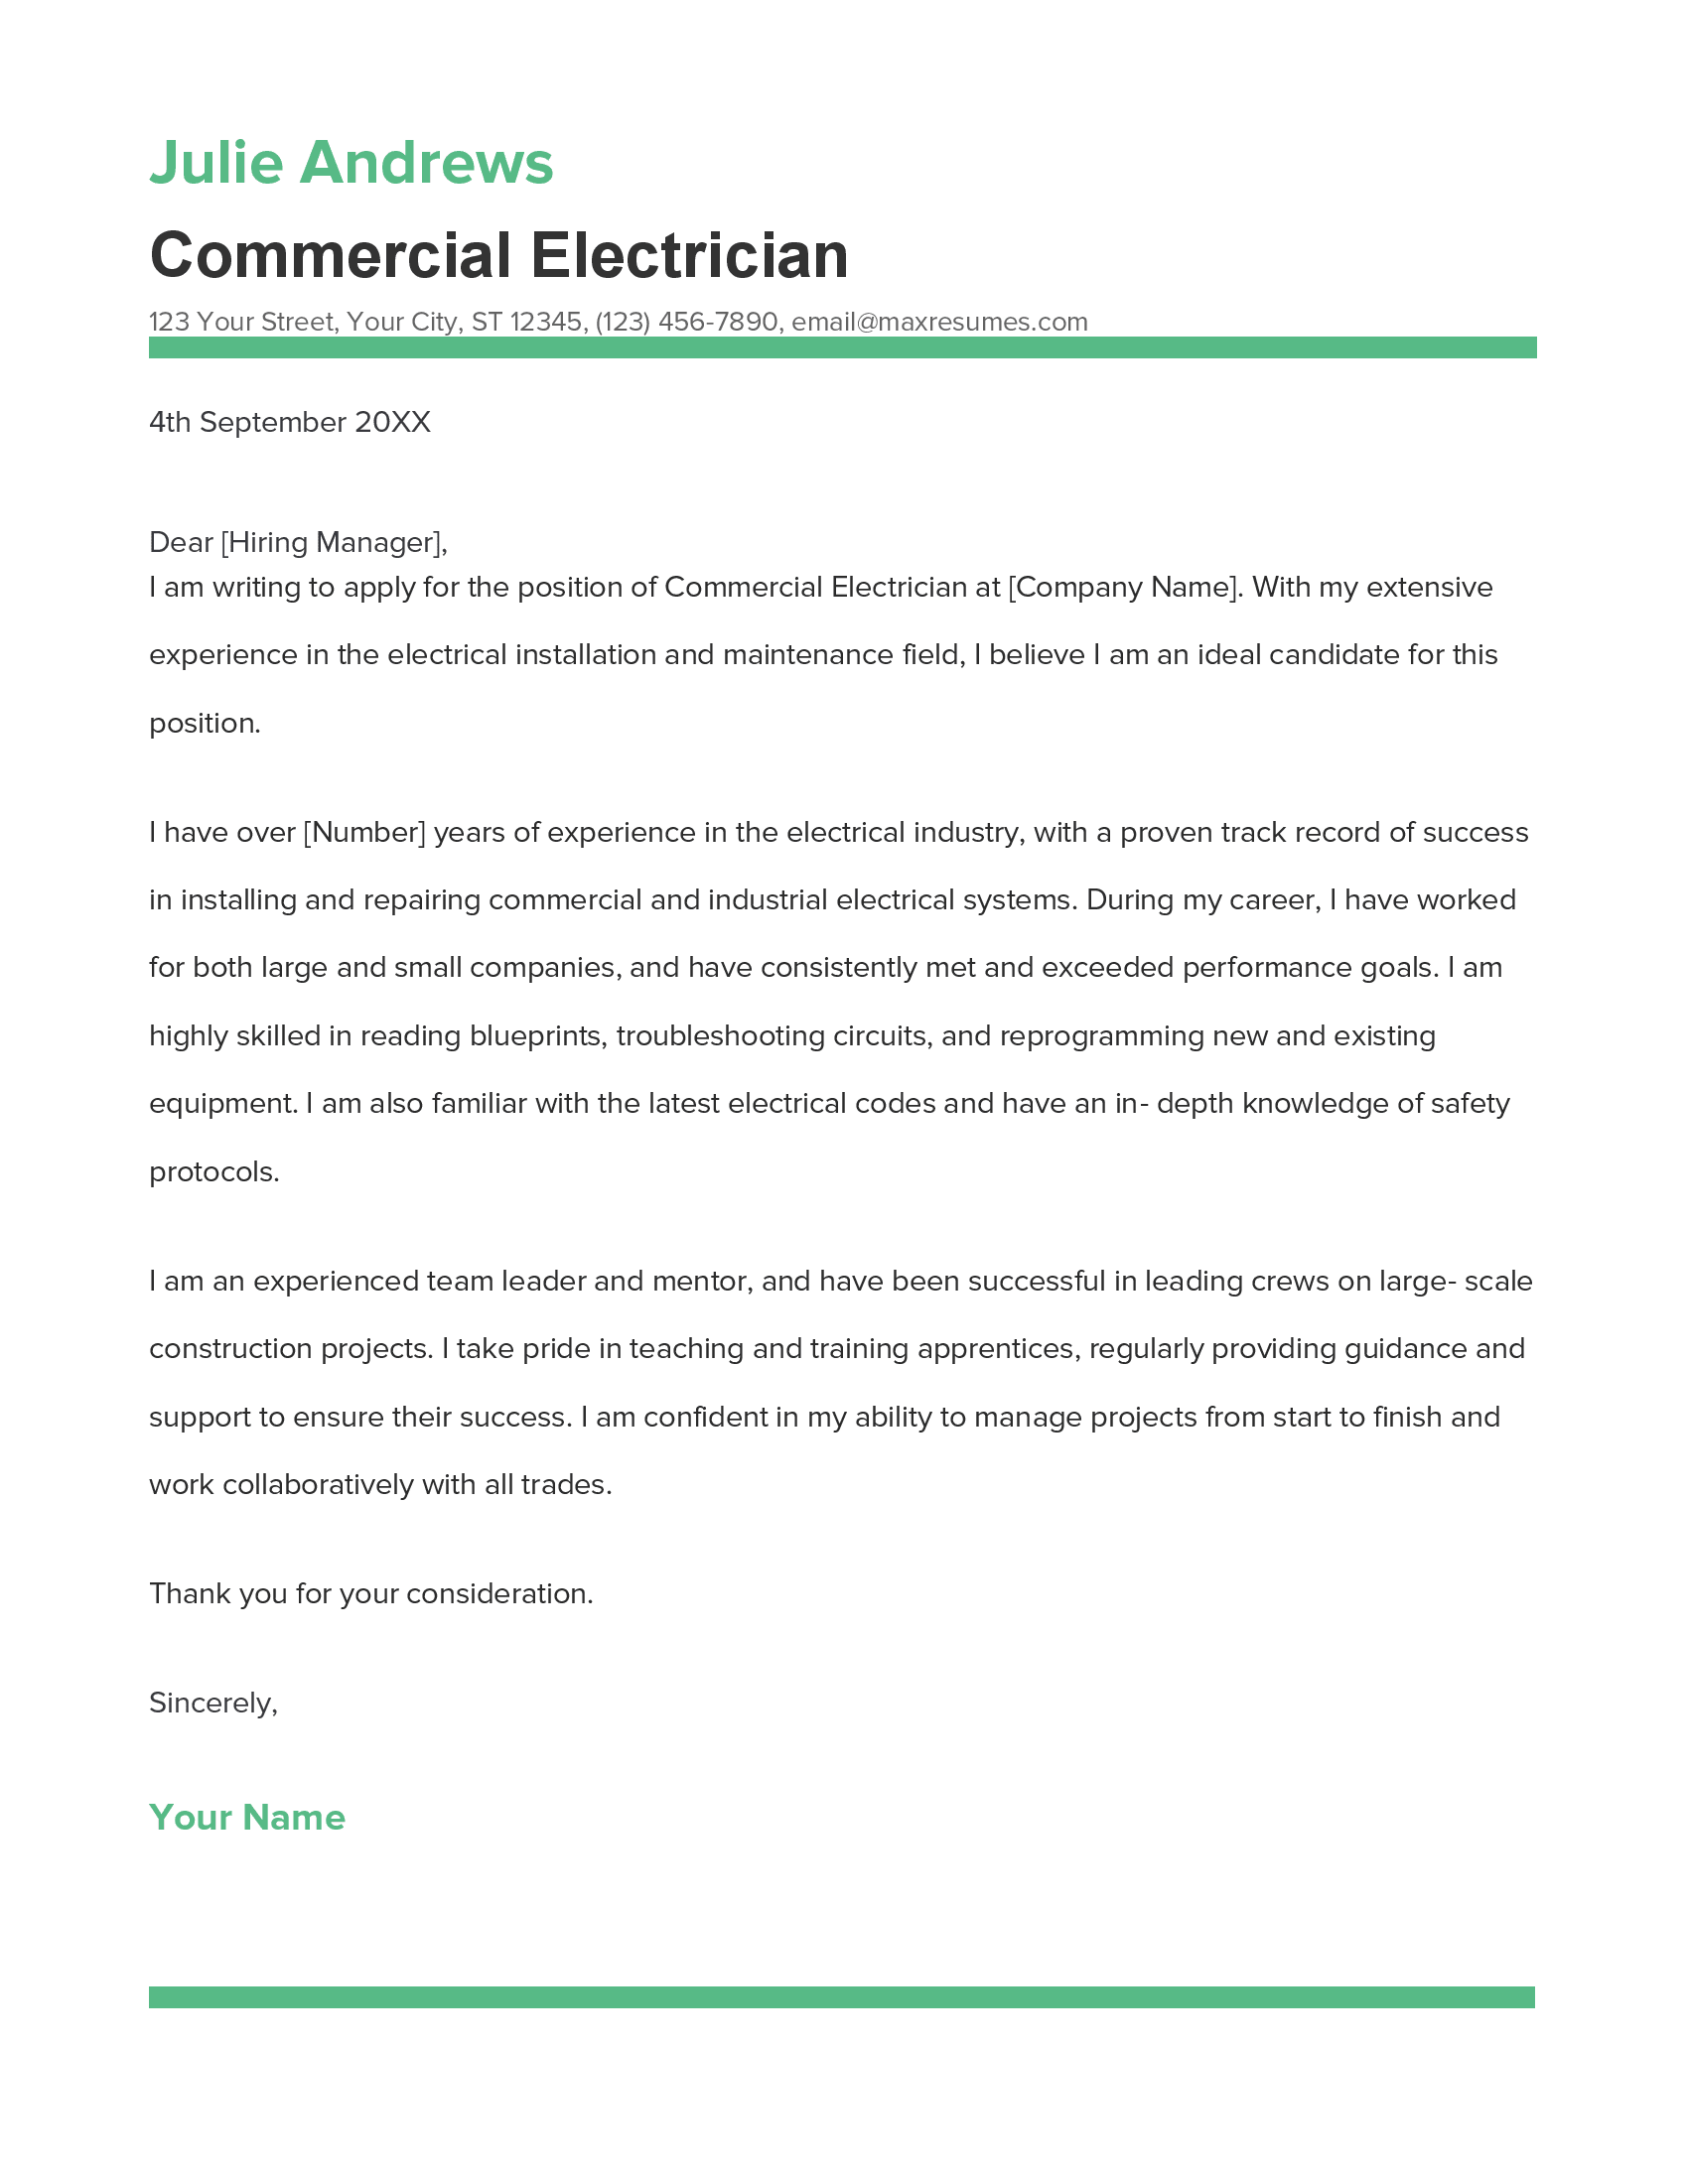 Commercial Electrician Cover Letter Example